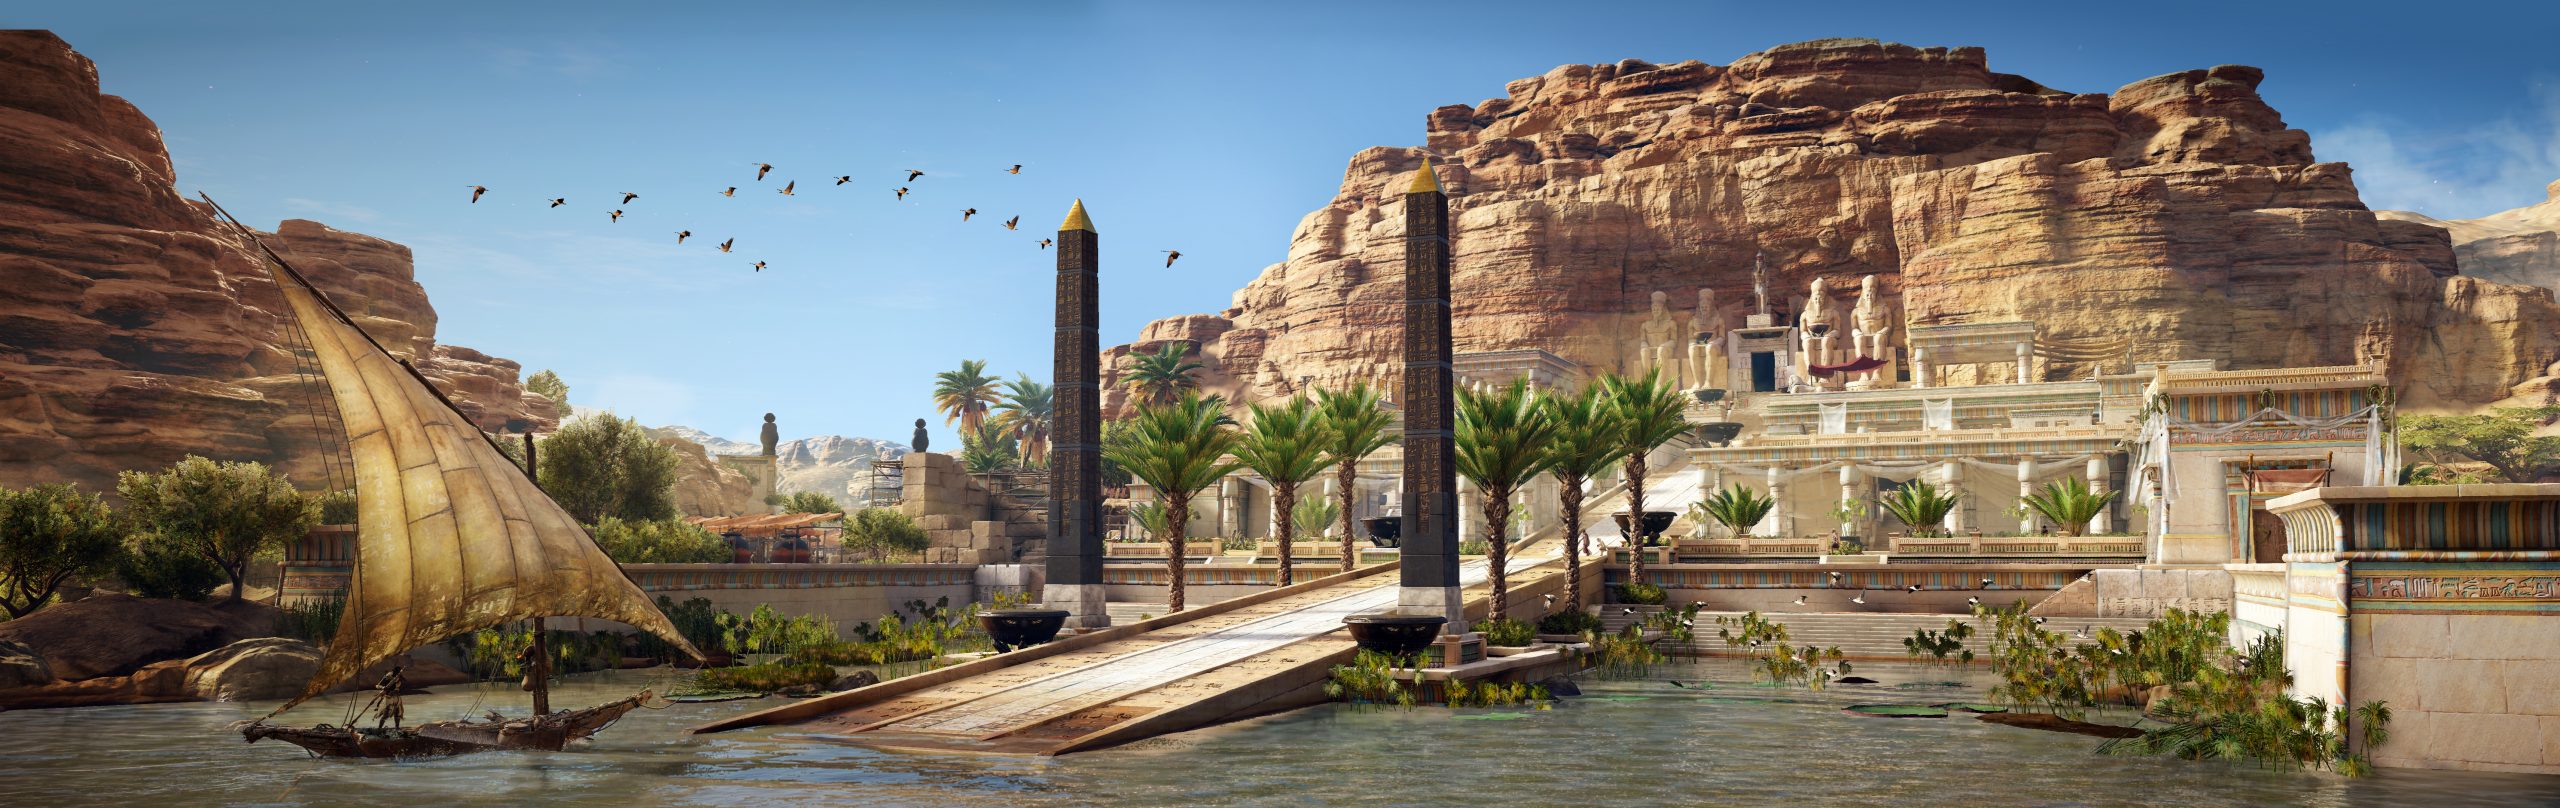 Assassin's Creed Origins Backgrounds, Pictures, Images